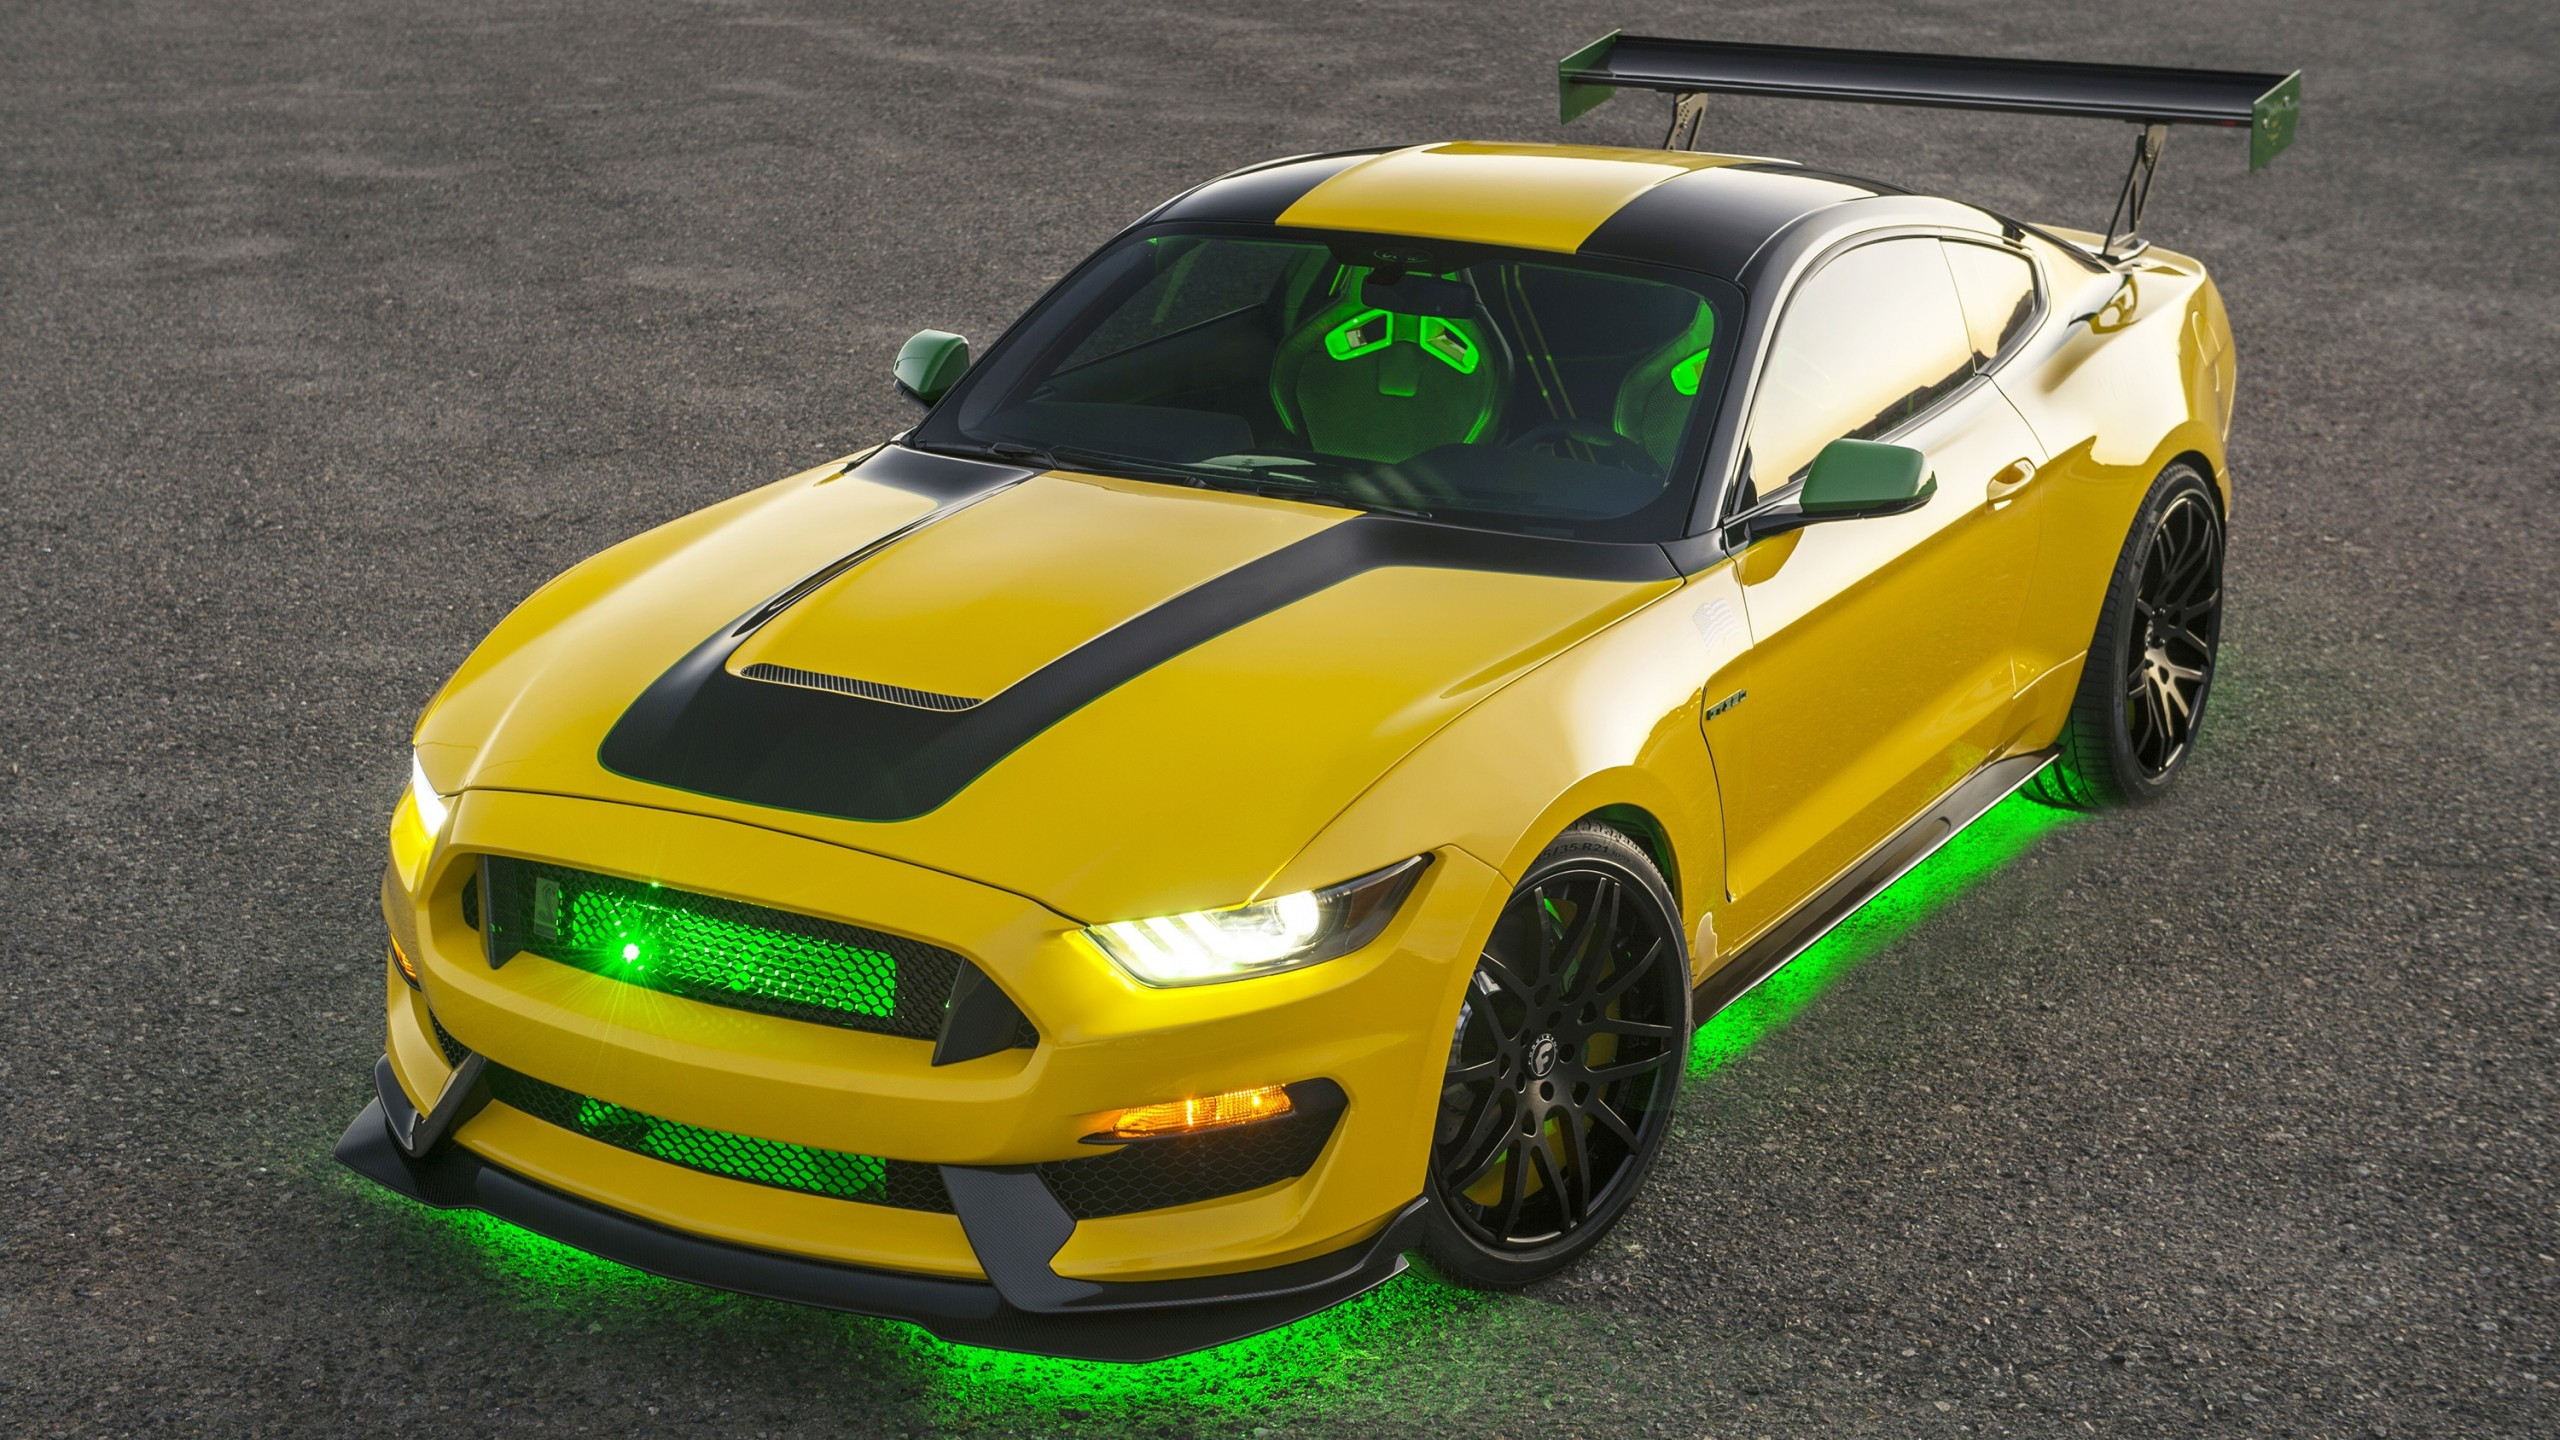 Download 2560x1440 Ford Mustang Shelby Gt Yellow, Neon Lights, Cars Wallpaper for iMac 27 inch